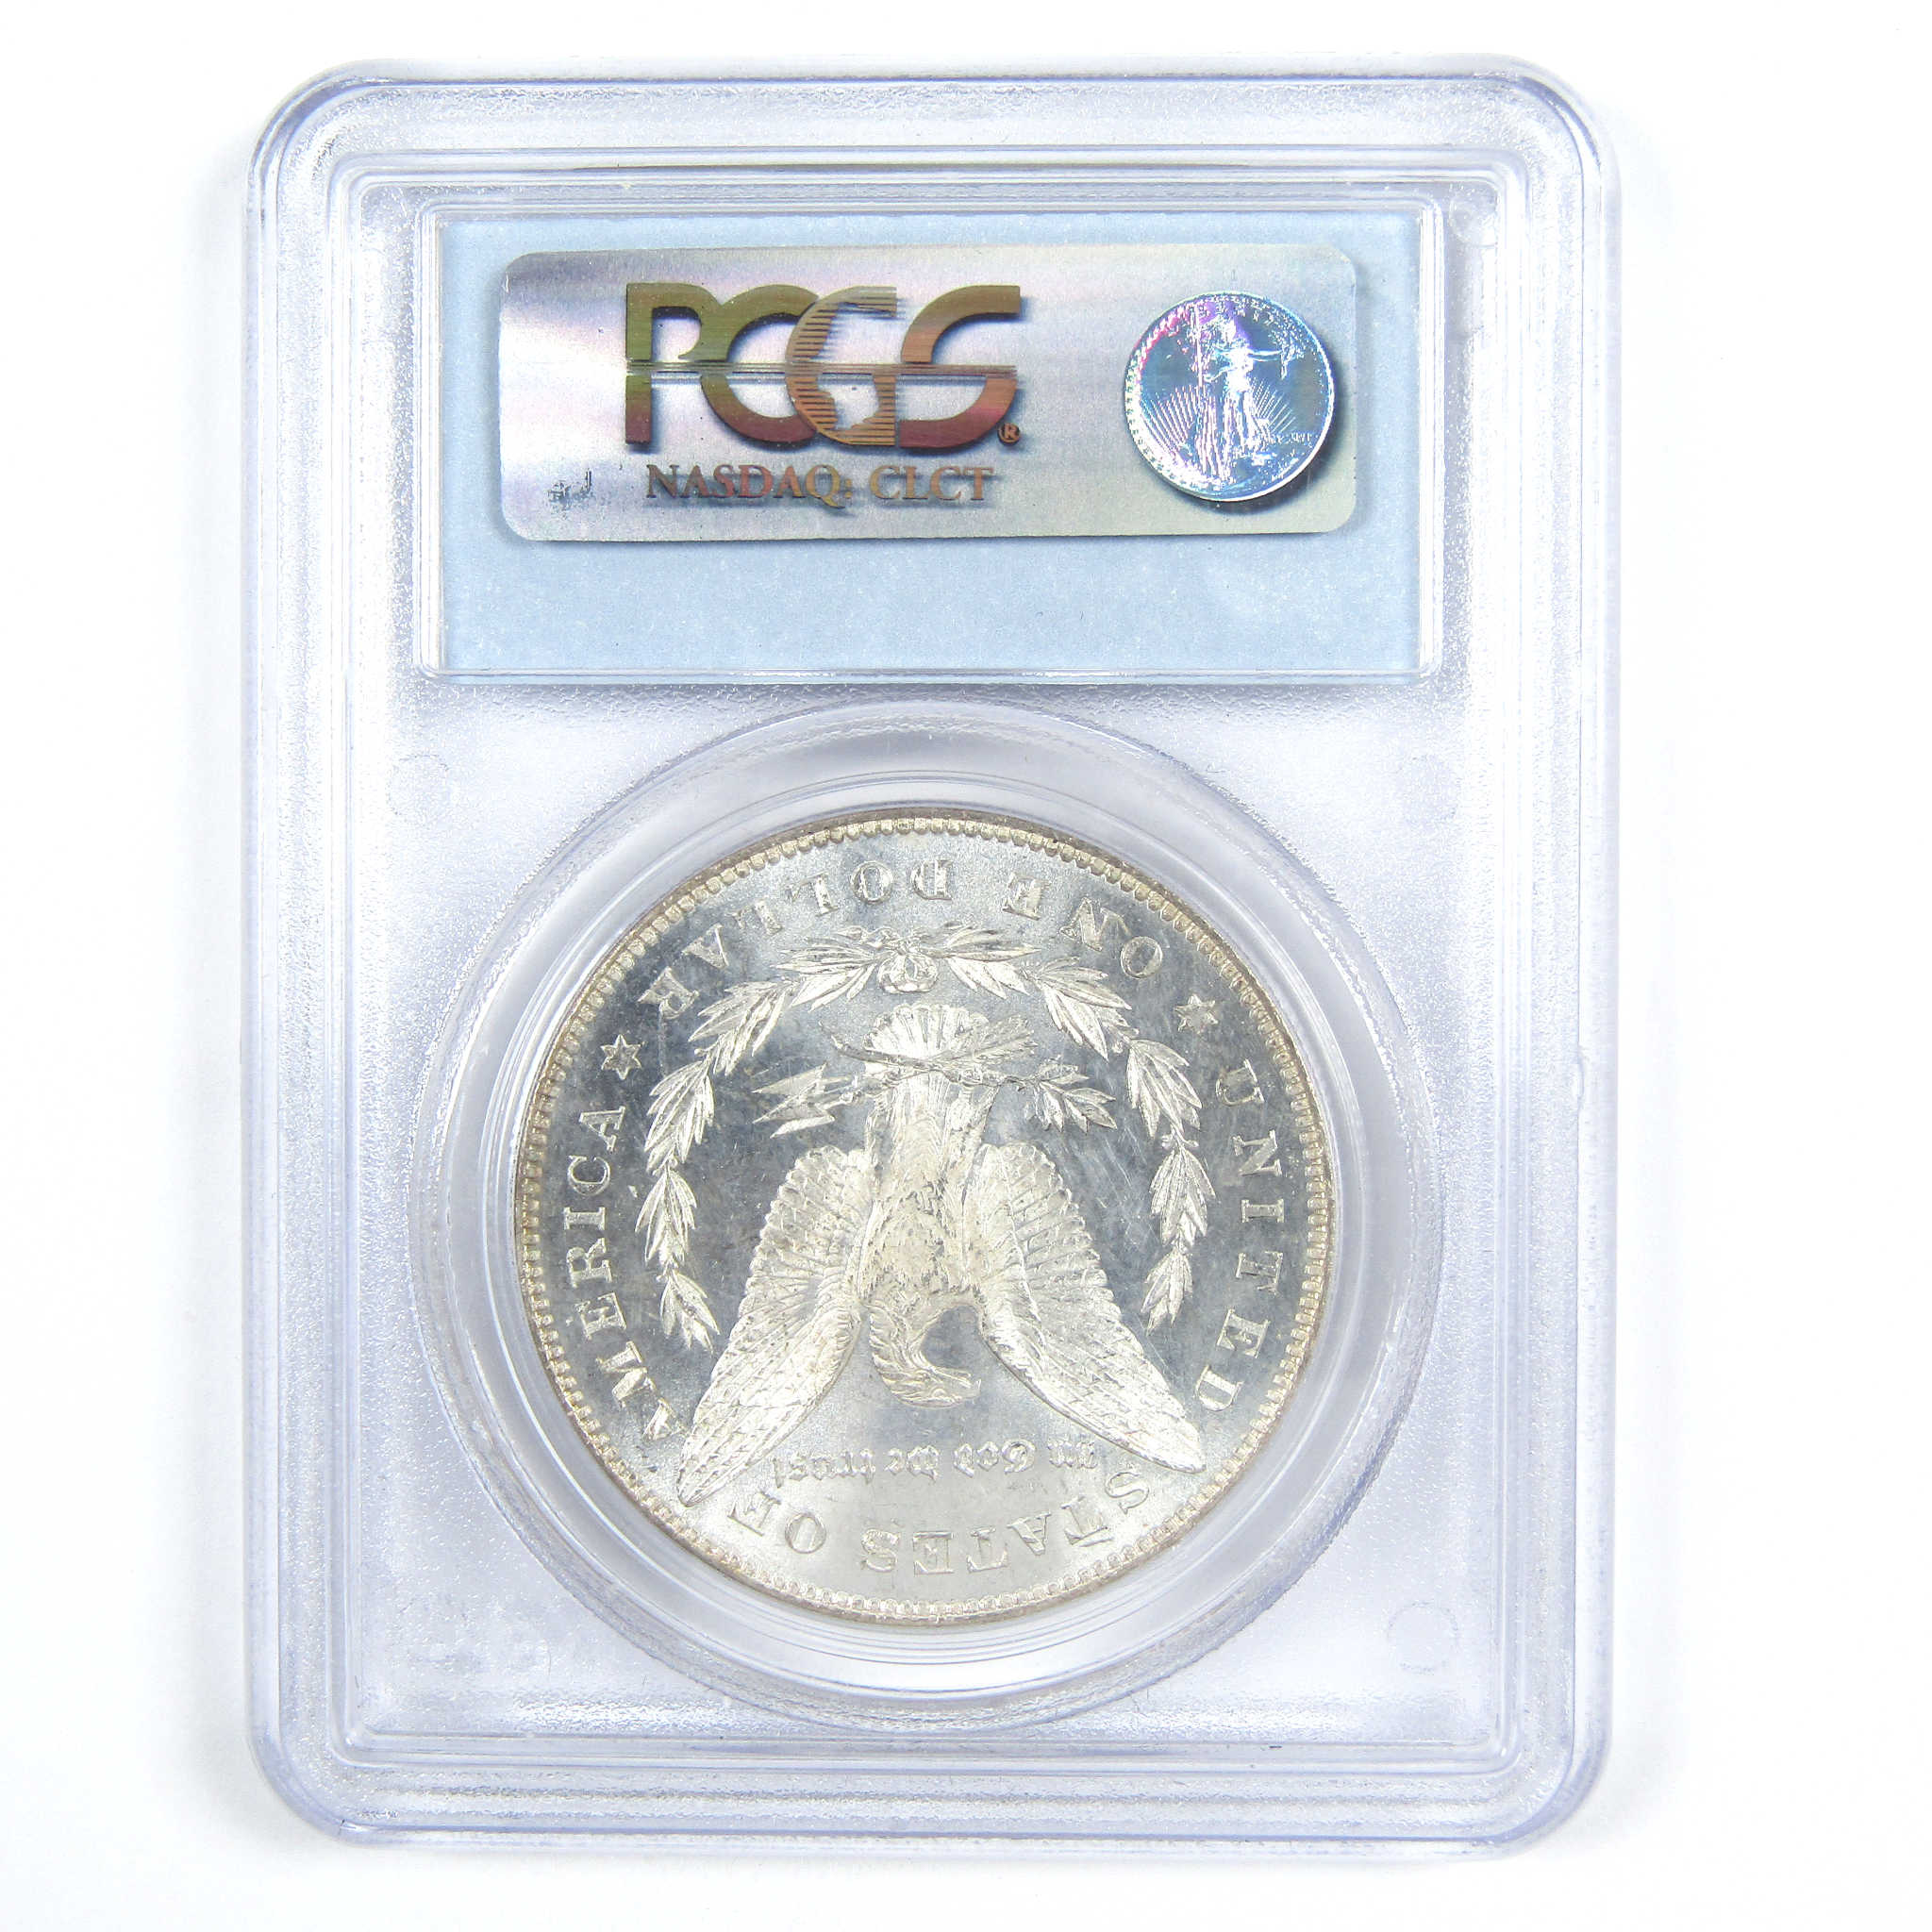 1878 7TF Rev 78 VAM-84 Line Under 8 Morgan $1 MS 63 PCGS SKU:CPC7341 - Morgan coin - Morgan silver dollar - Morgan silver dollar for sale - Profile Coins &amp; Collectibles